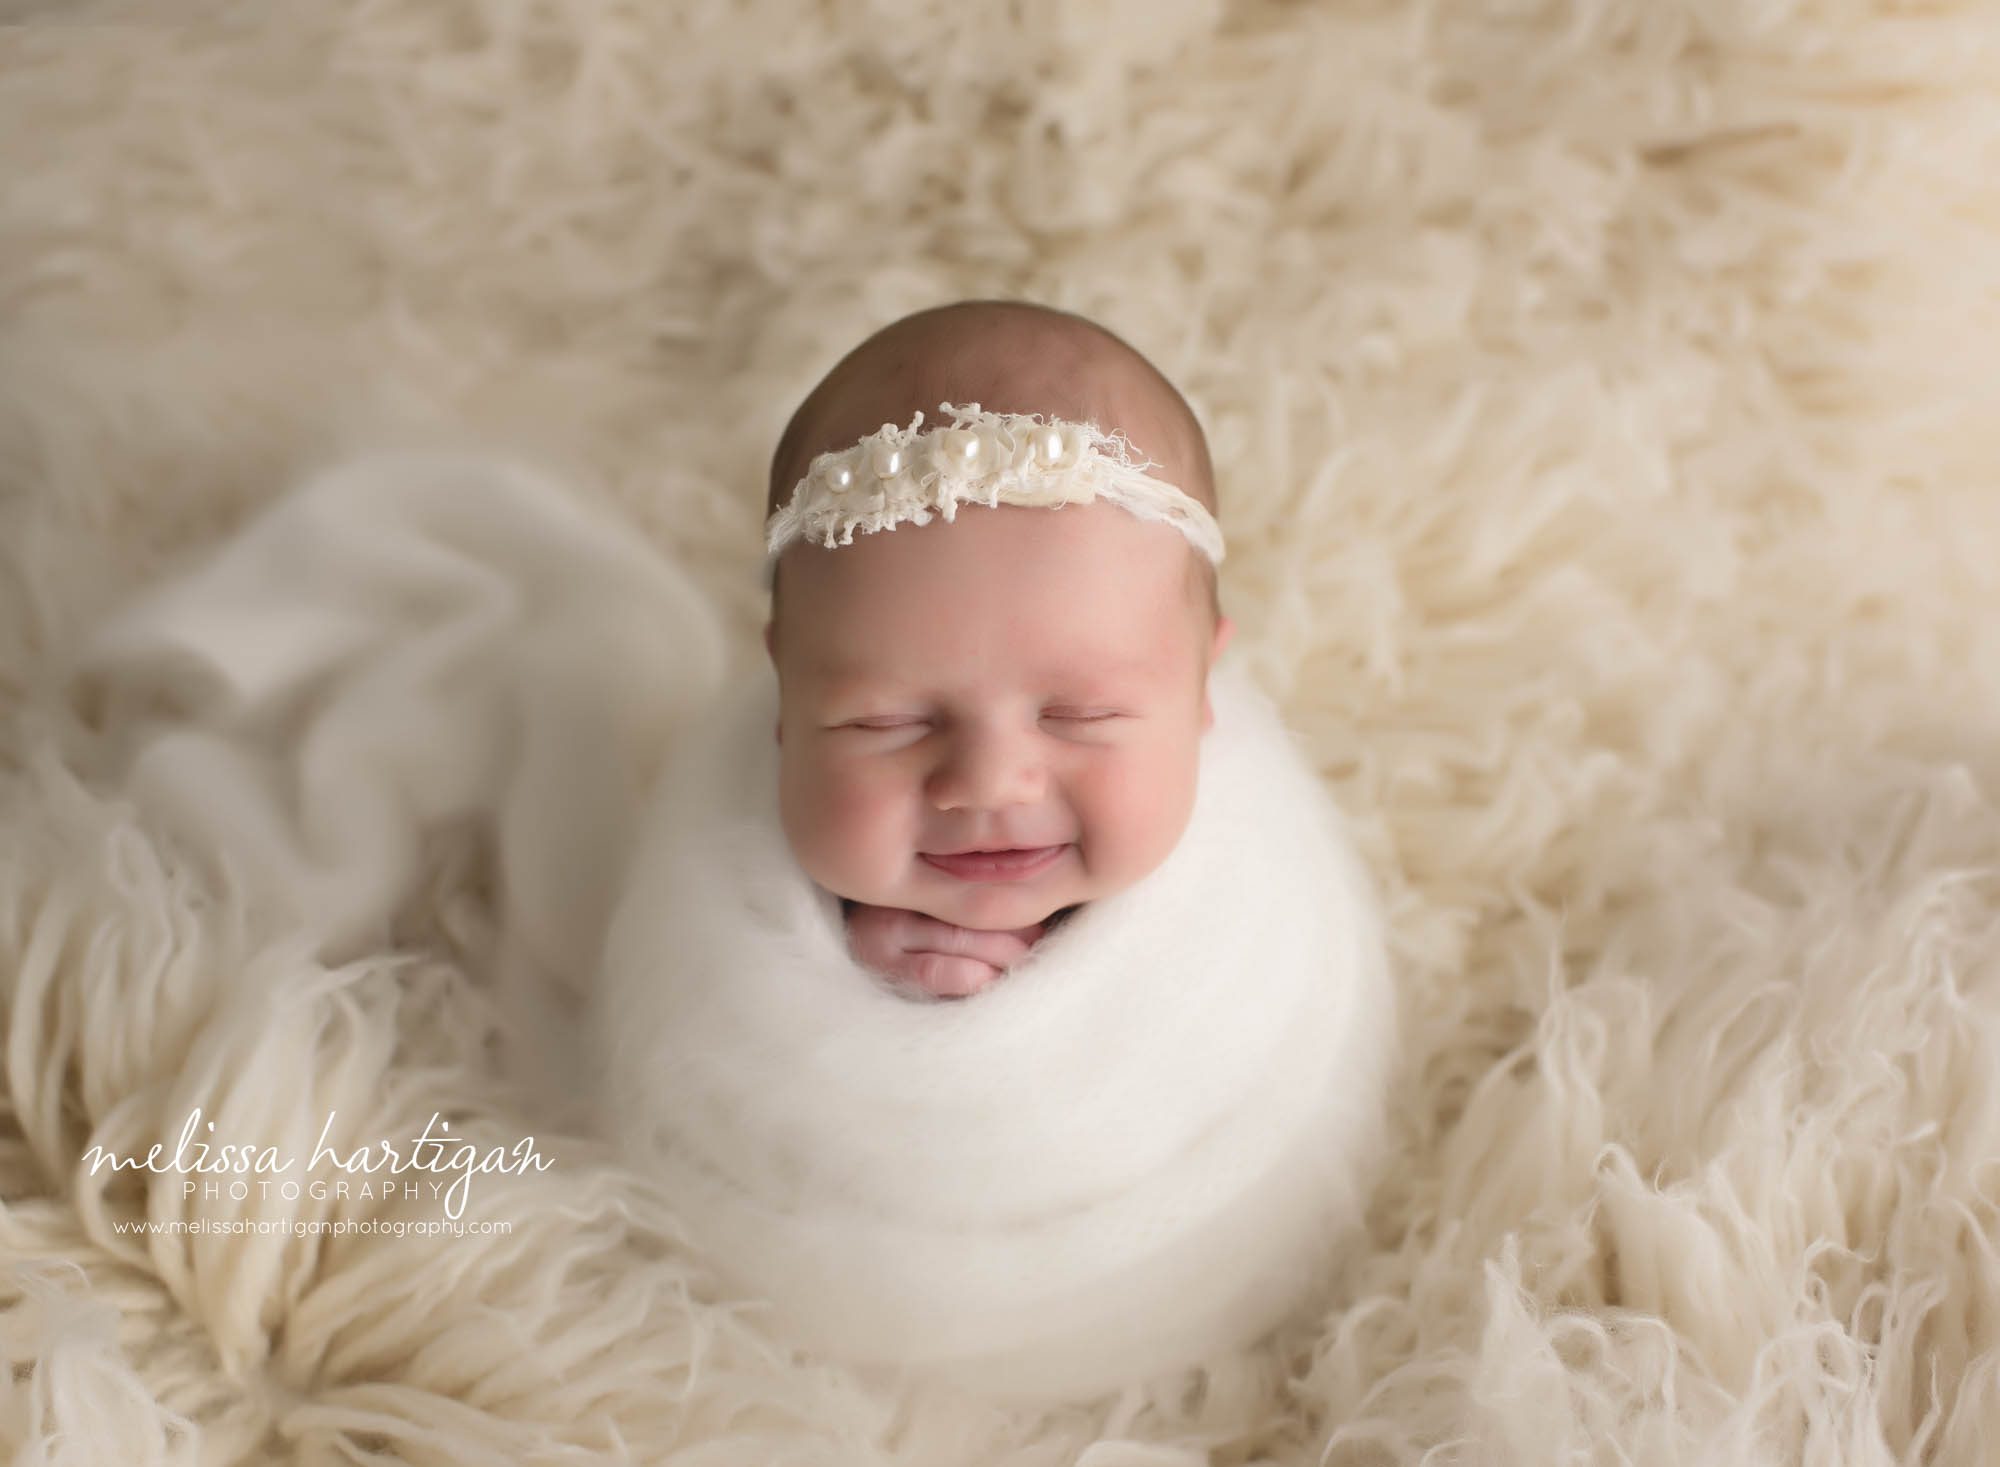 Baby girl wrapped in white knitted wrap on cream flokati CT newborn photographer